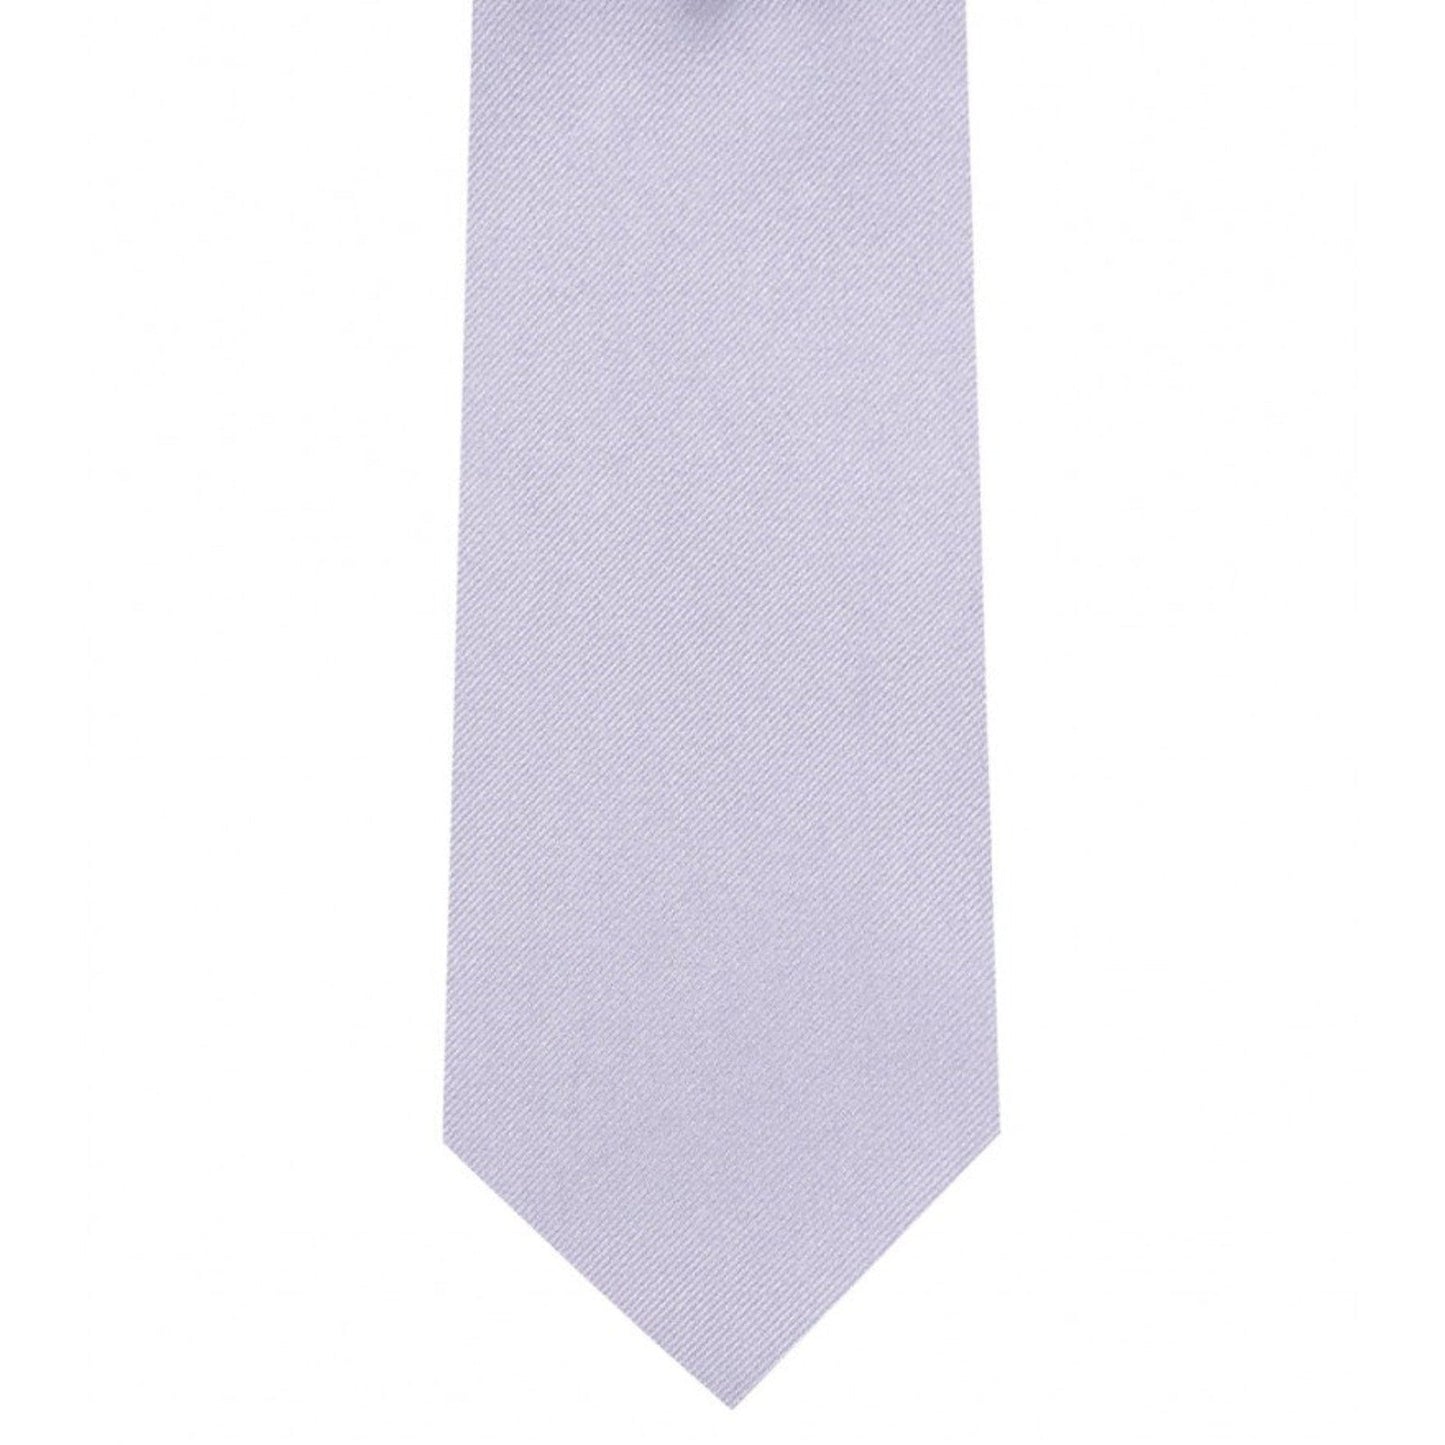 Classic Light Lilac Tie Ultra Skinny tie width 2.25 inches With Matching Pocket Square | KCT Menswear